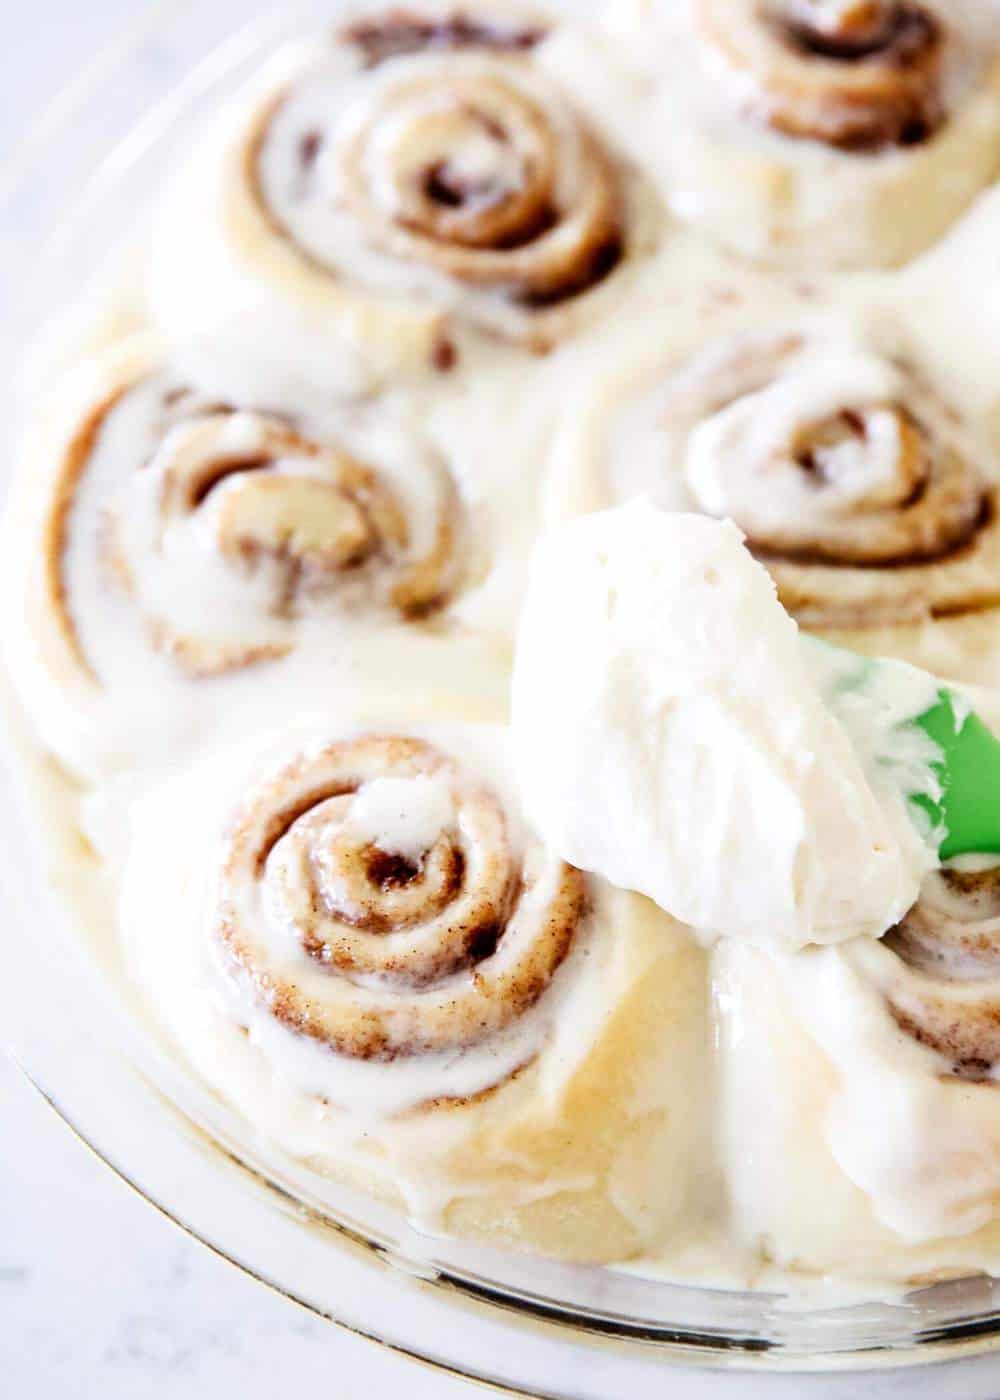 Homemade cinnamon rolls with frosting.